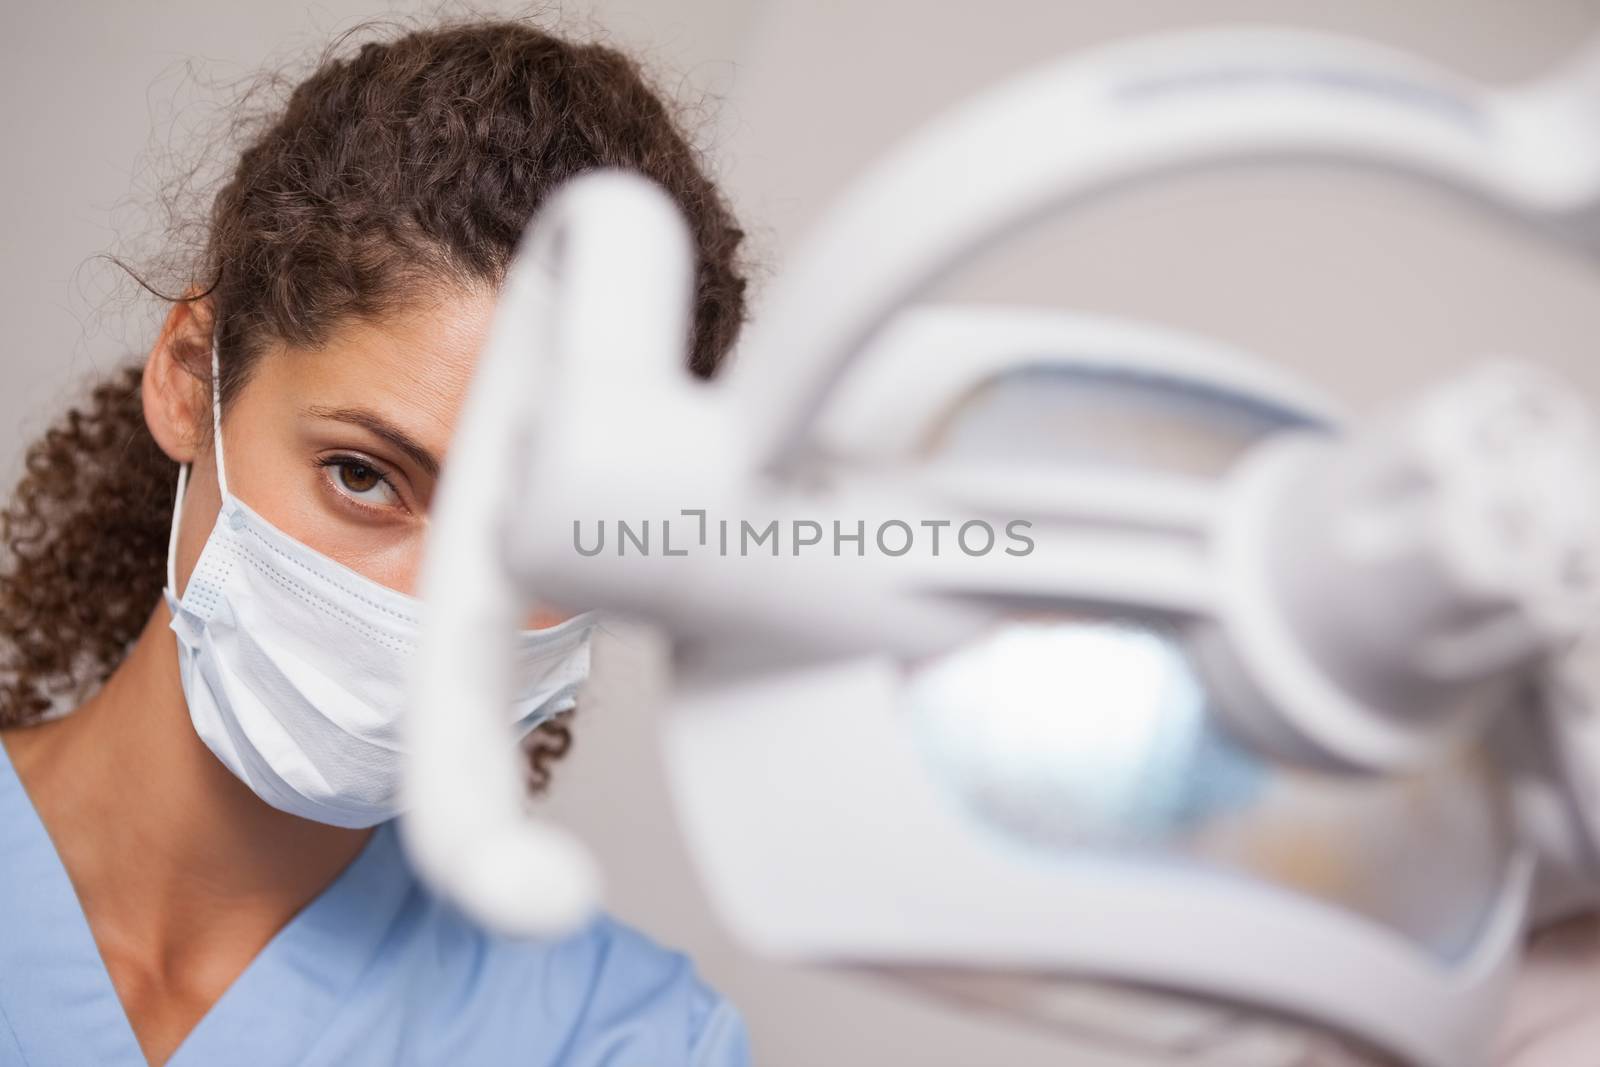 Dentist in surgical mask looking at camera by Wavebreakmedia